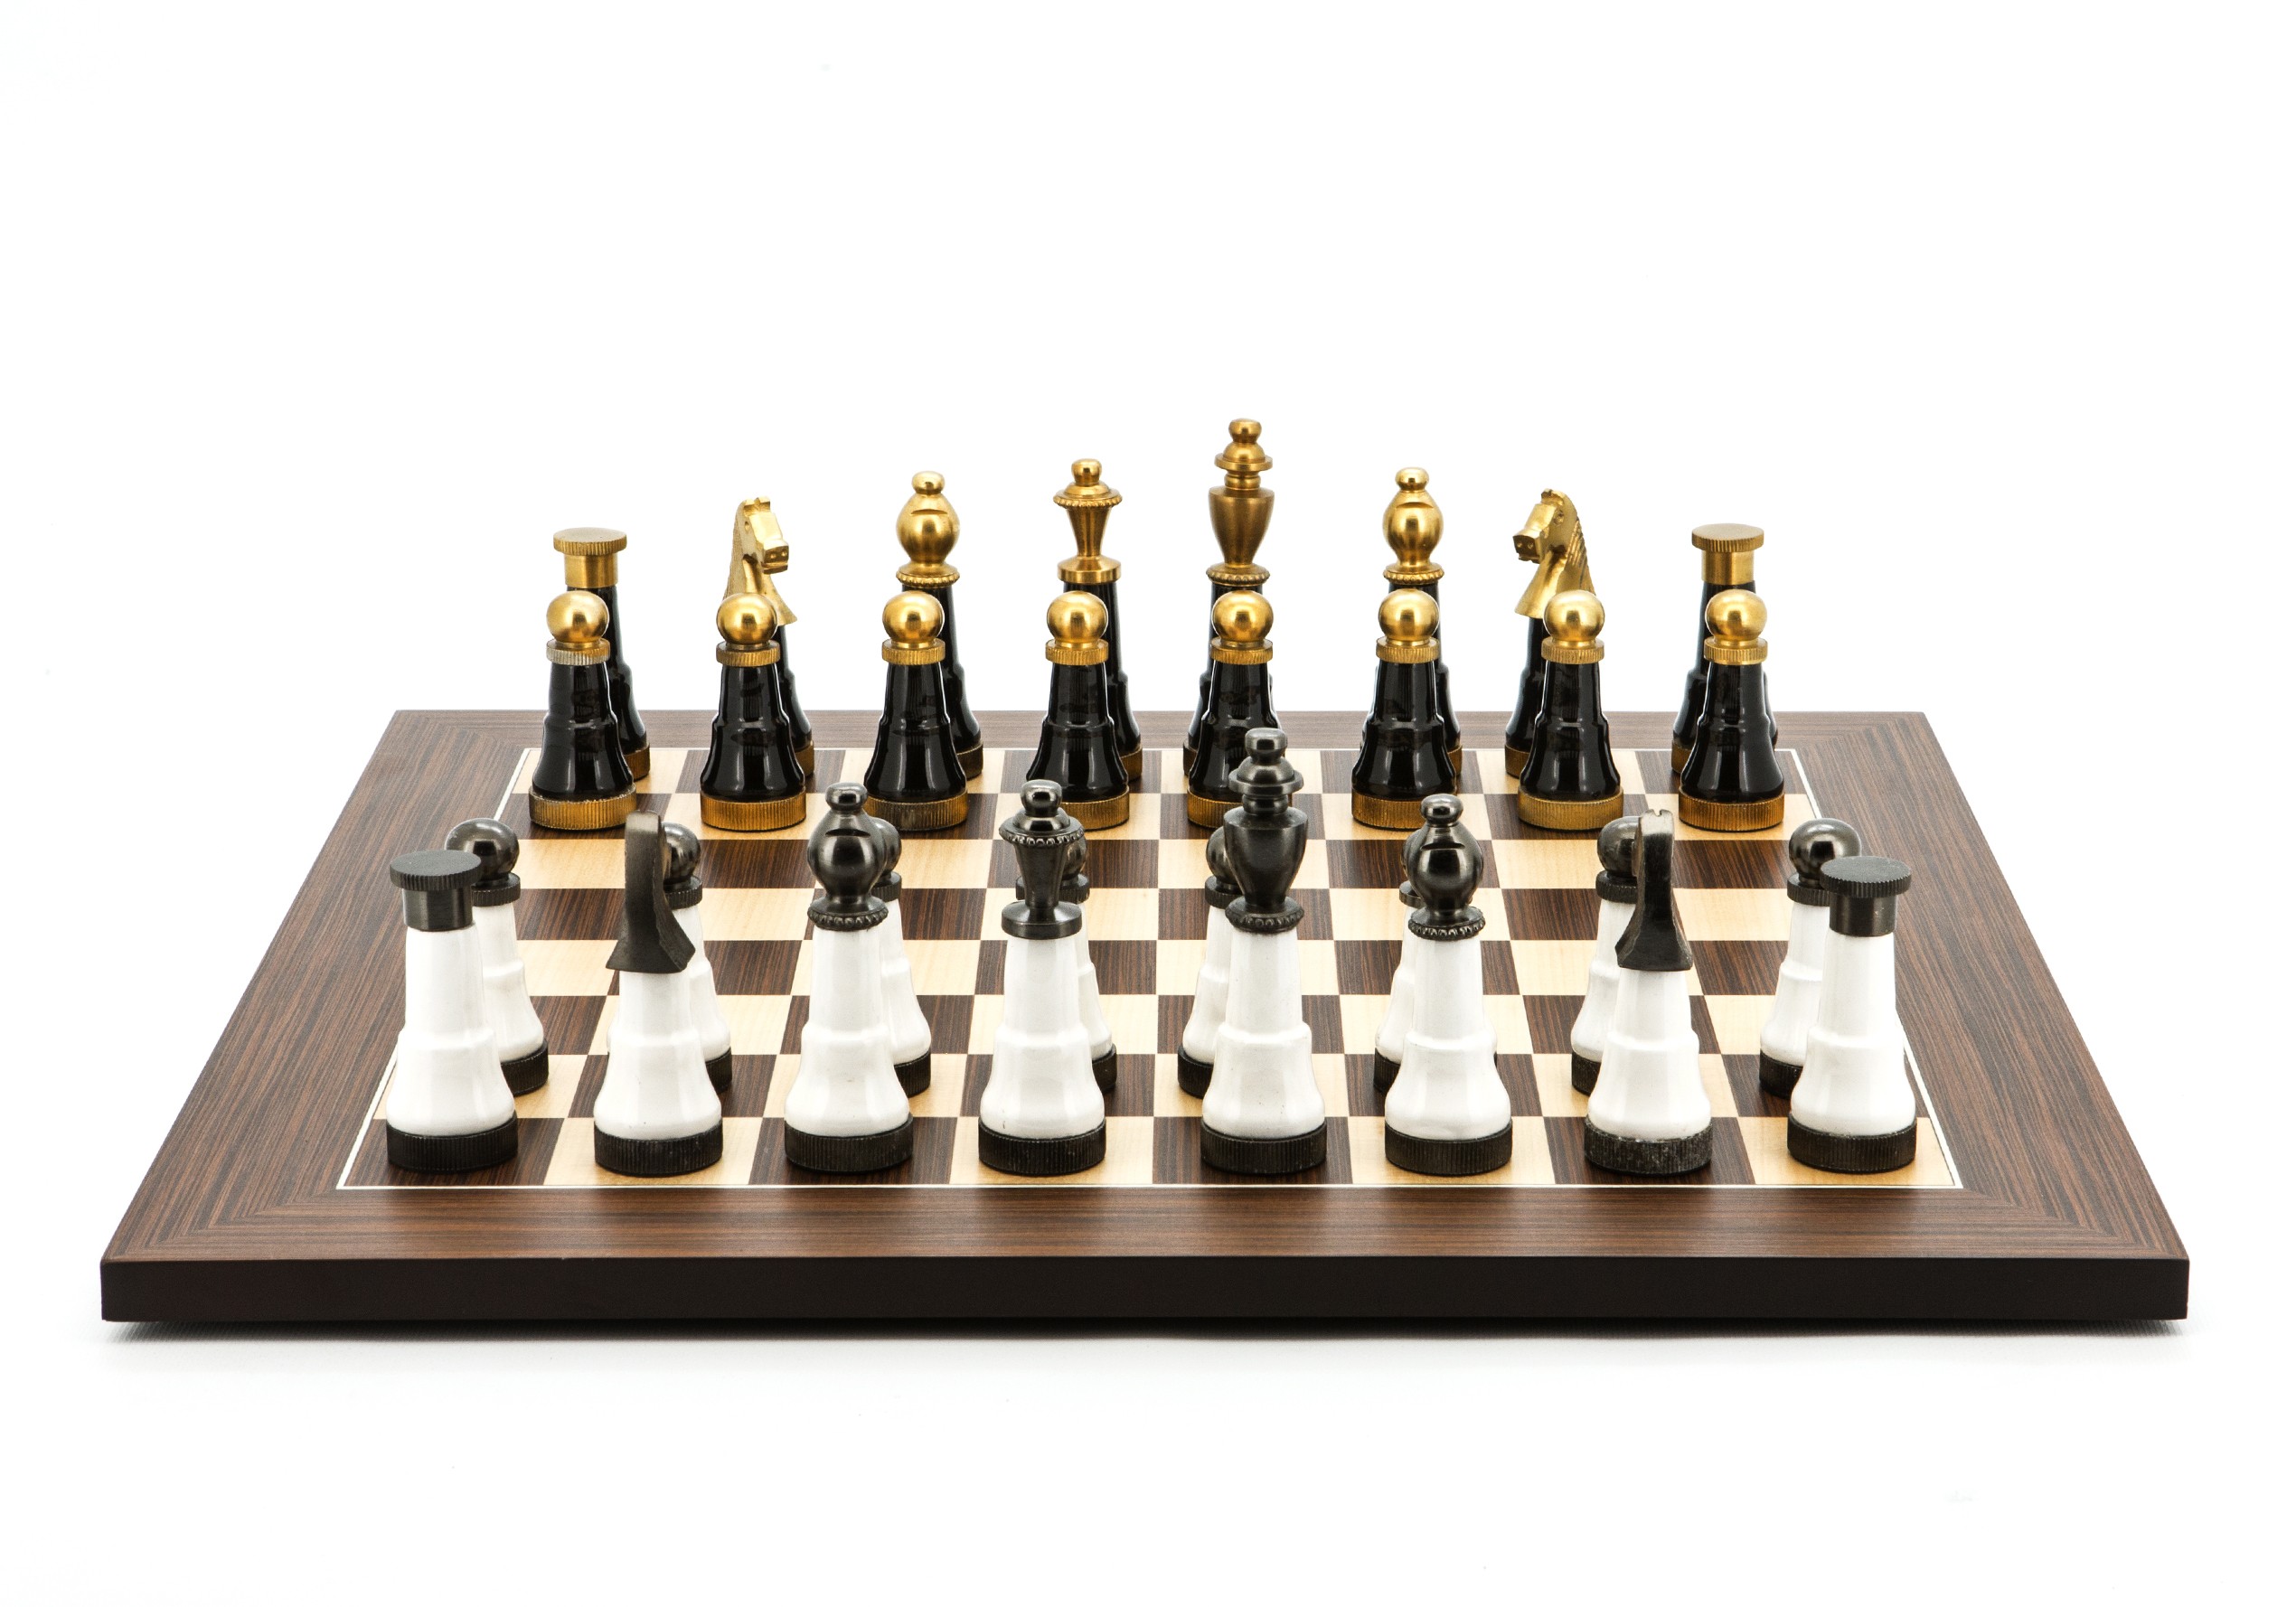 Dal Rossi Italy Chess Set Palisander / Maple Flat Board 50cm, With Black and White with Gold and Gun Metal Tops and Bottoms Chessmen 110mm